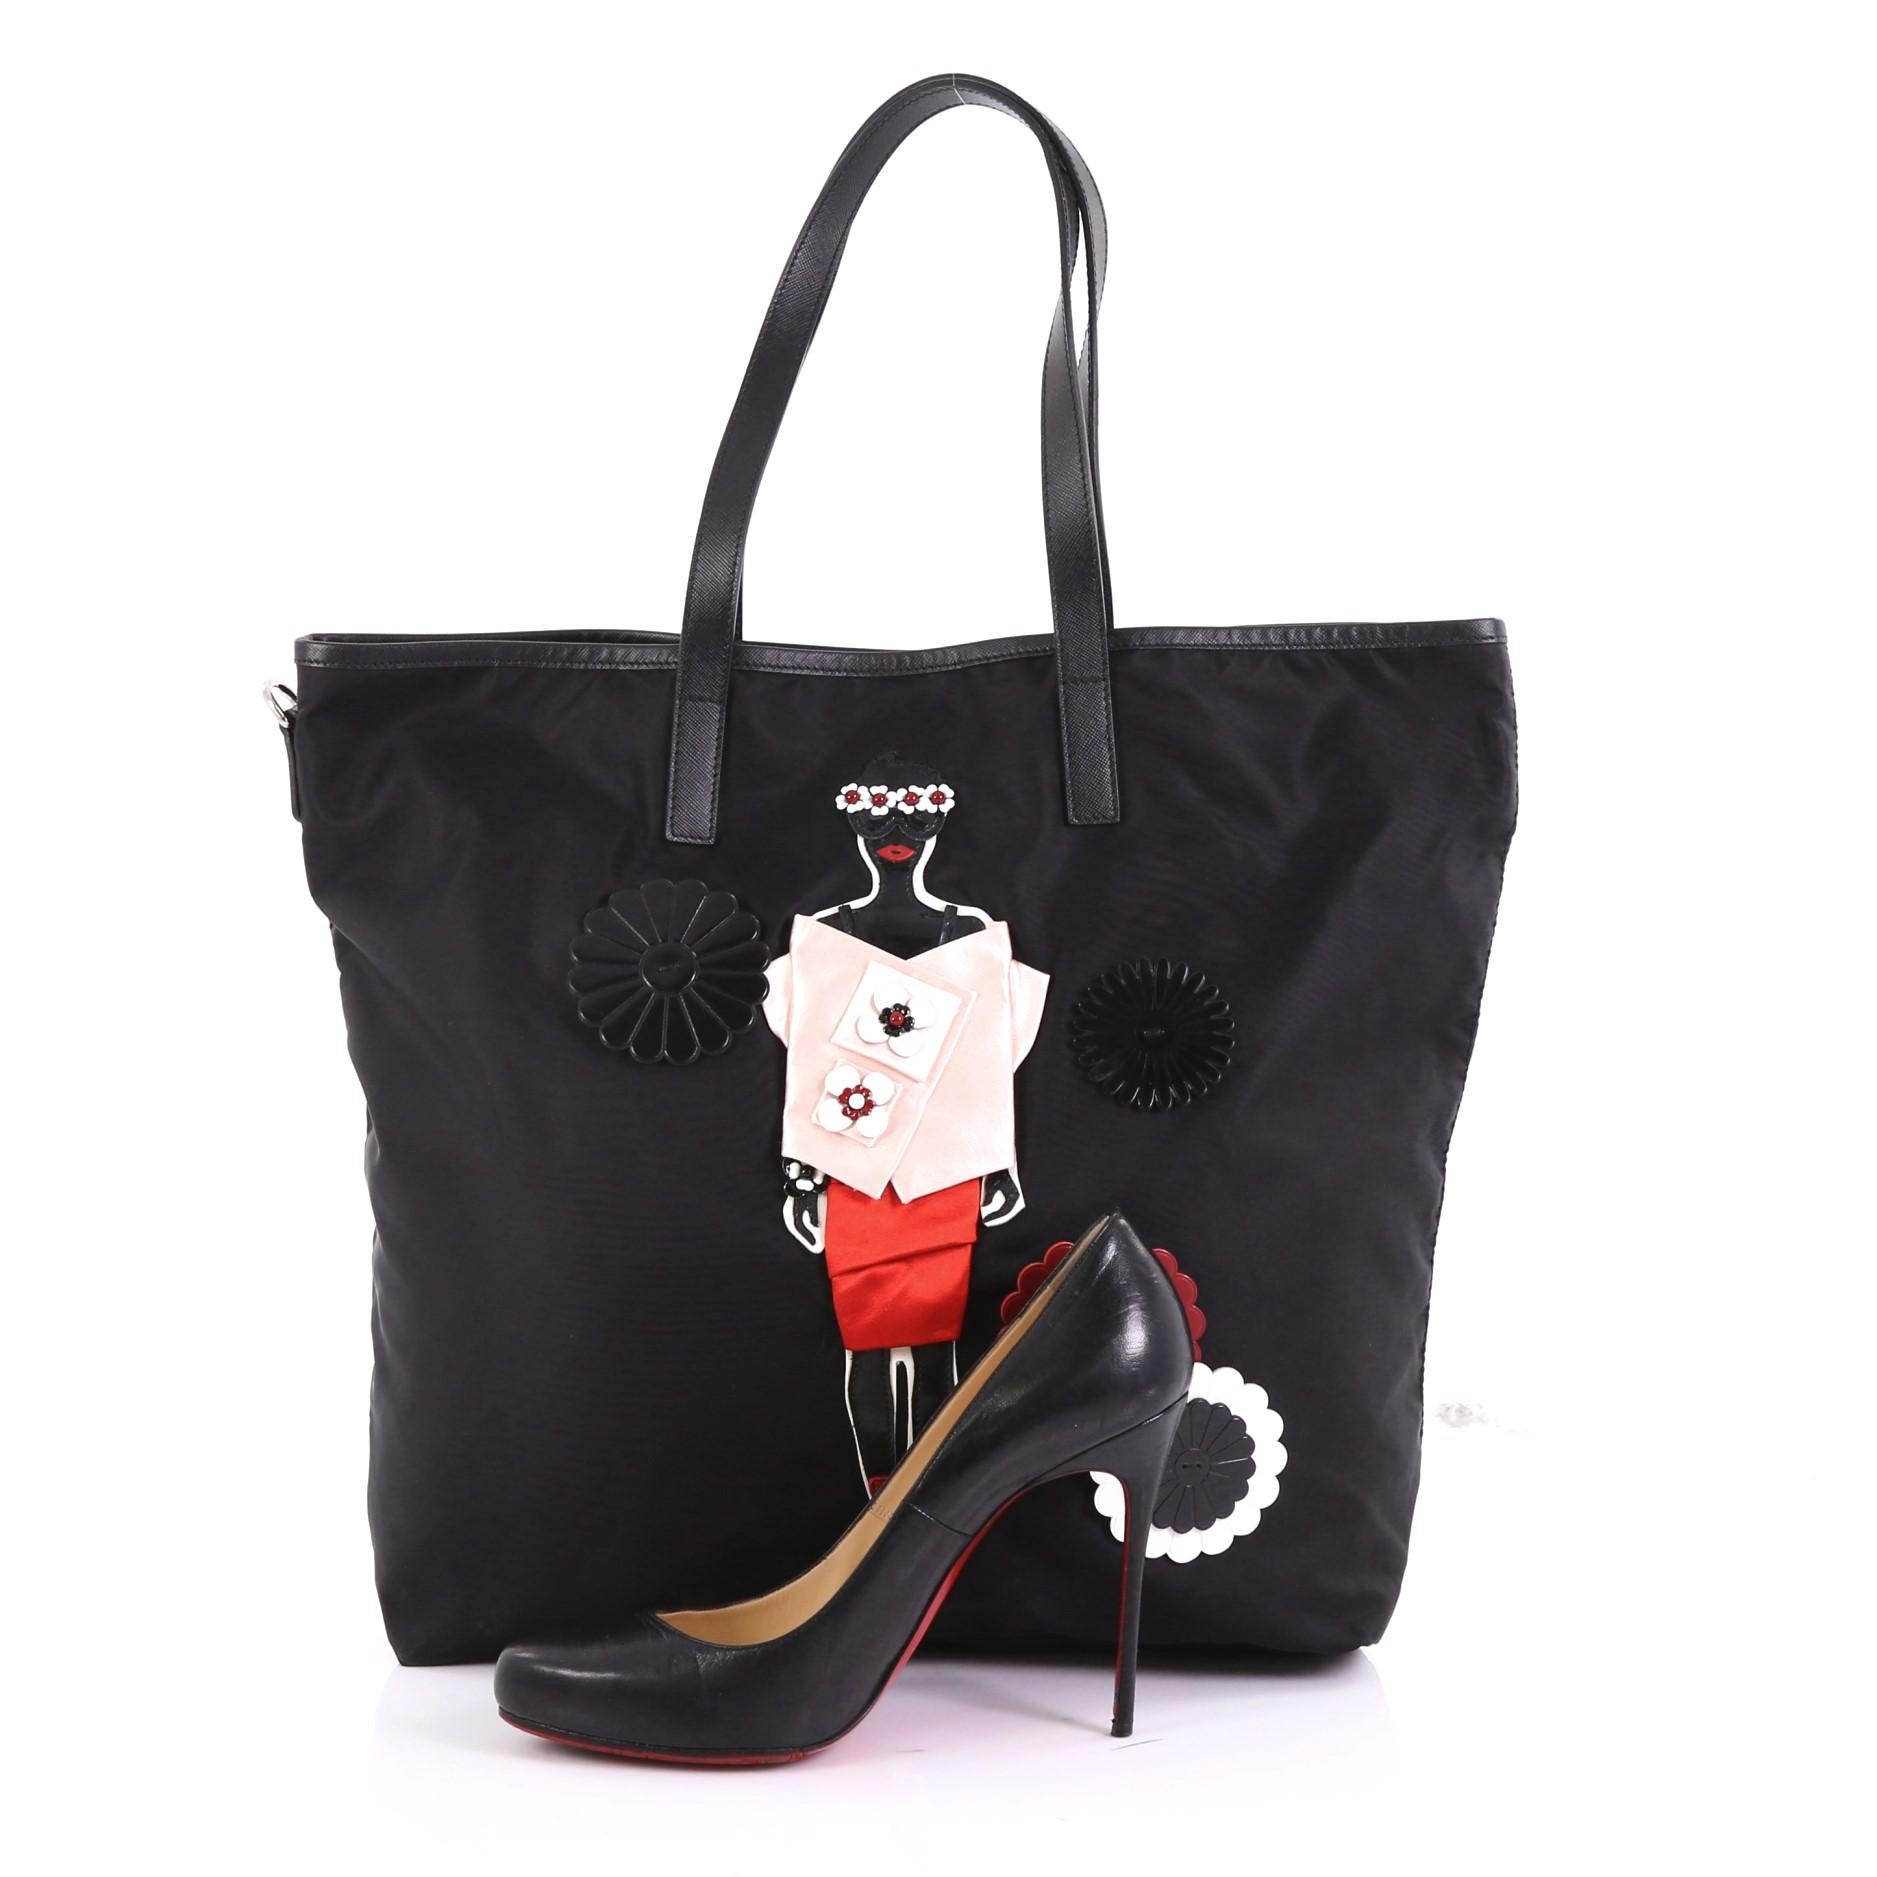 This Prada Open Tote Tessuto with Applique Large, crafted in black tessuto with applique, features dual flat leather handles and silver-tone hardware. Its wide open top showcases a black fabric interior with zip pocket. **Note: Shoe photographed is